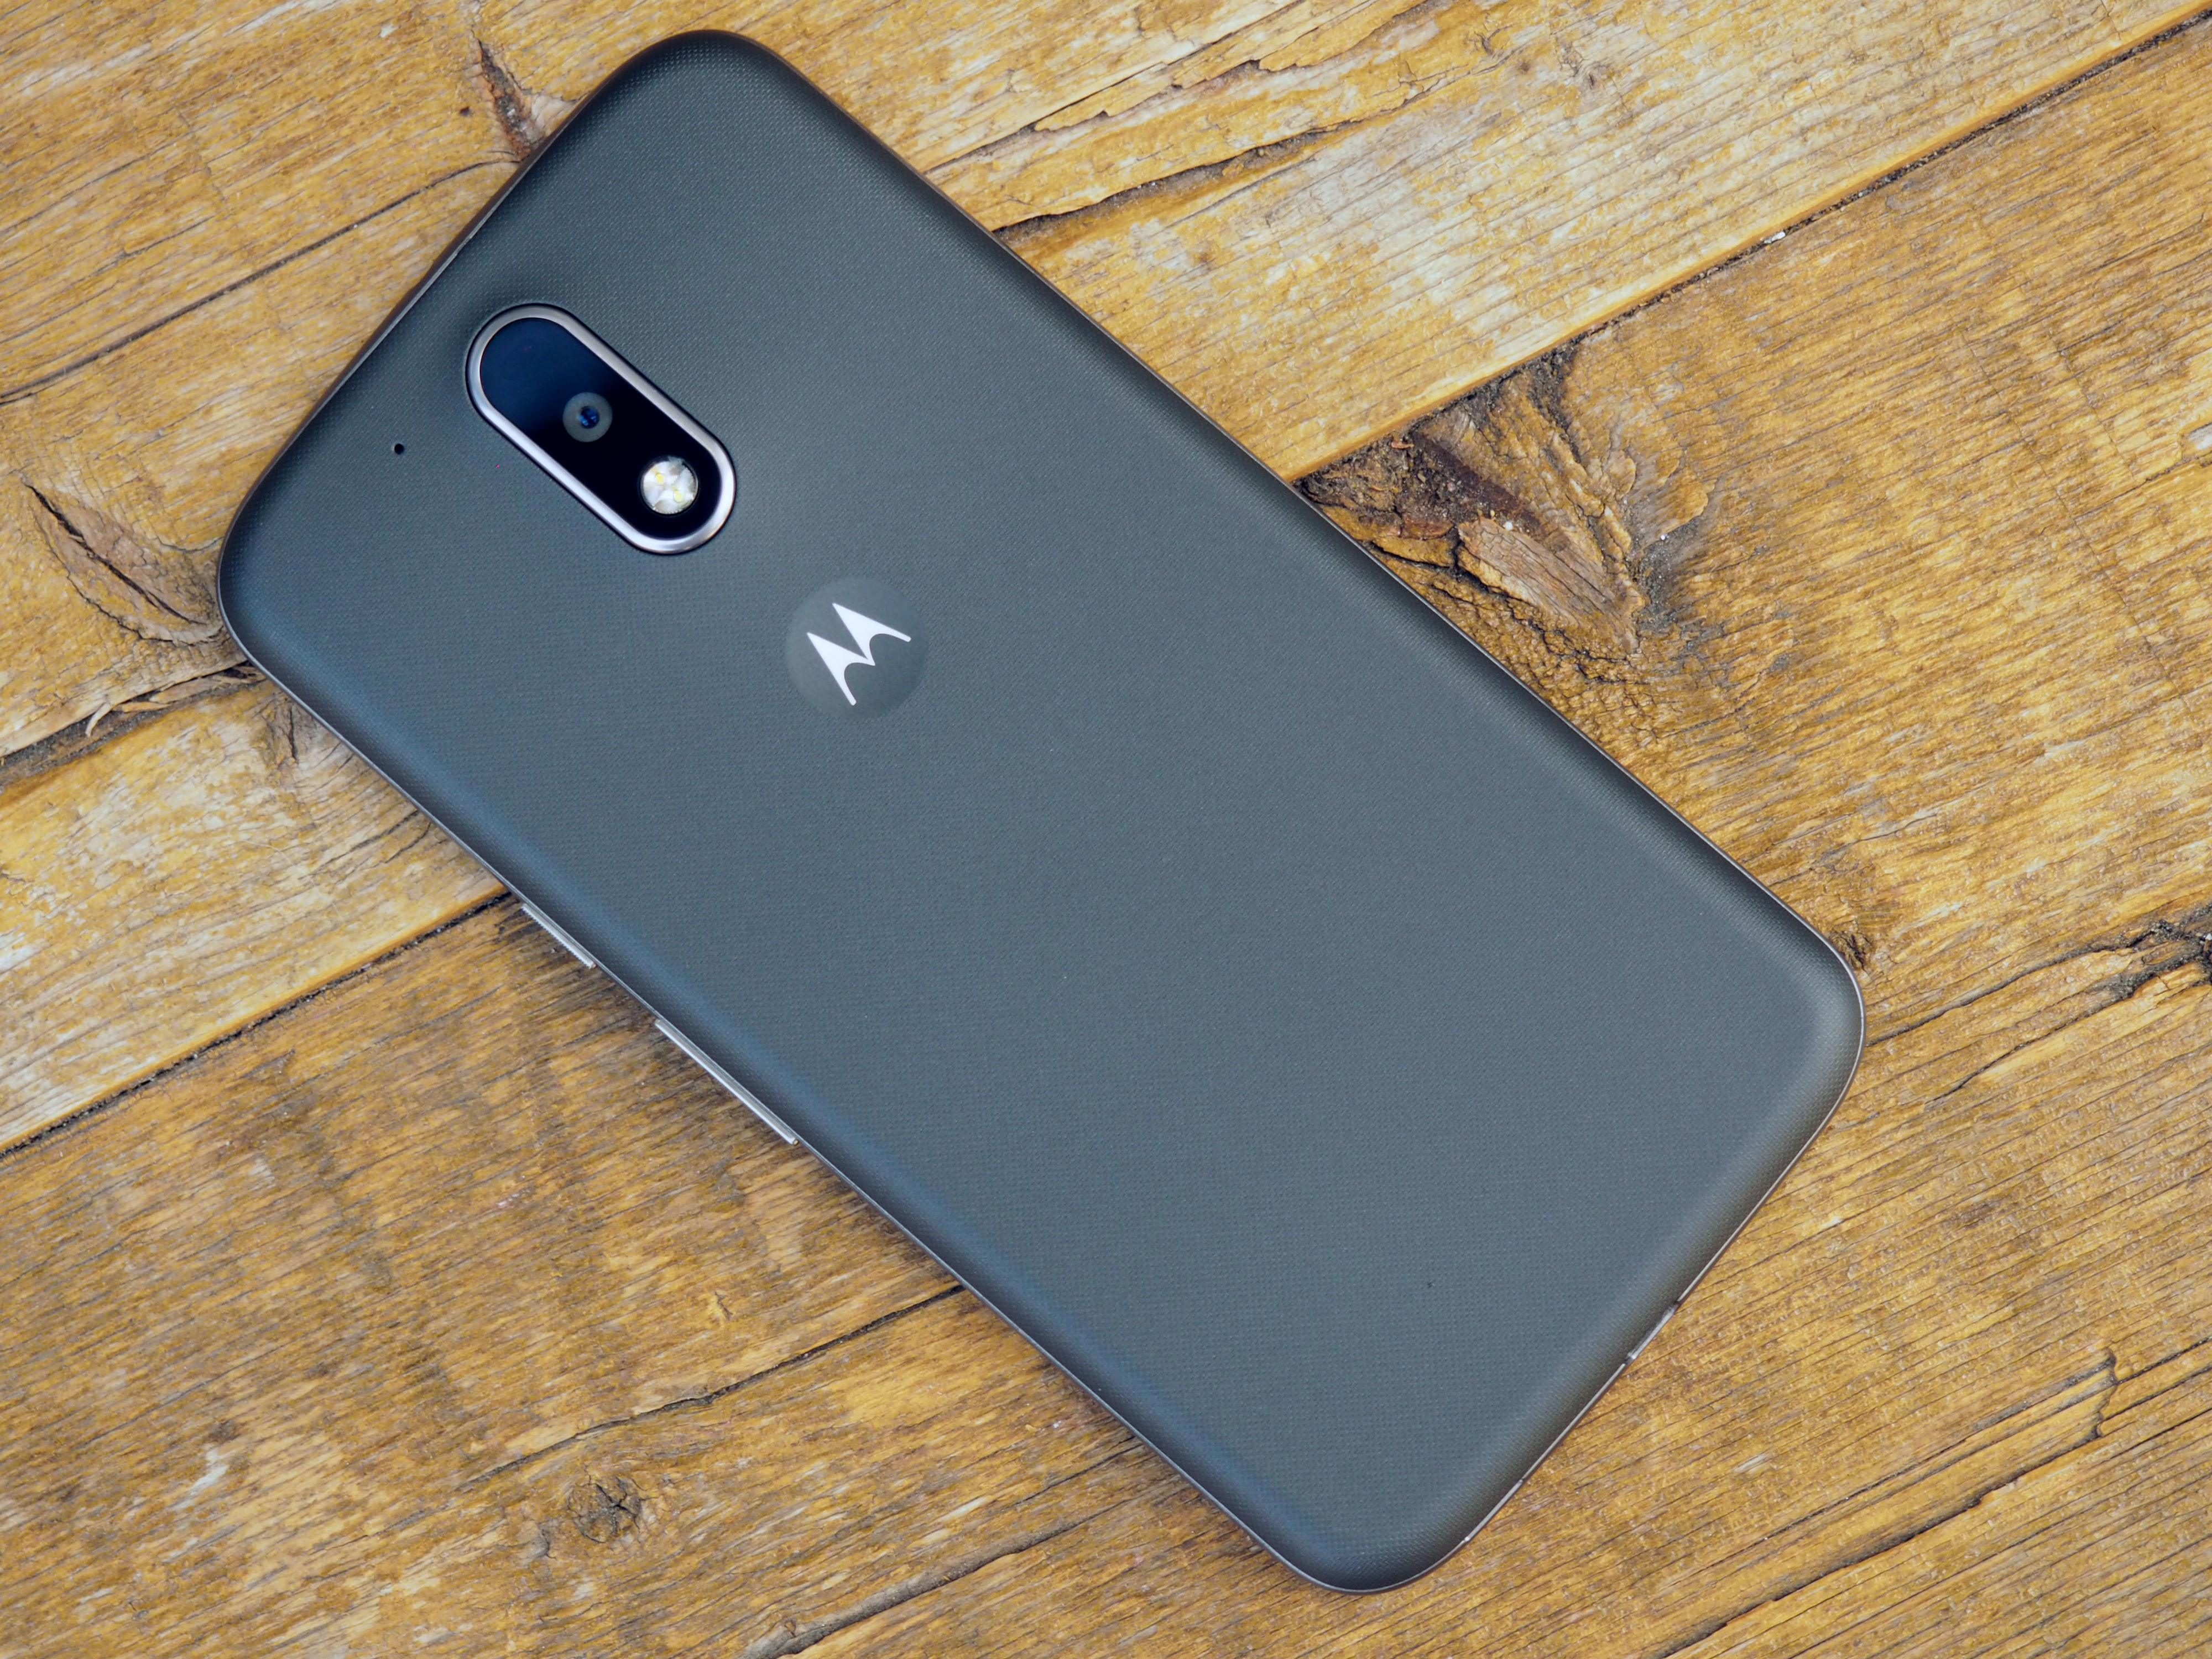 Motorola delivers a for a little with the $199 Moto G4 | TechCrunch